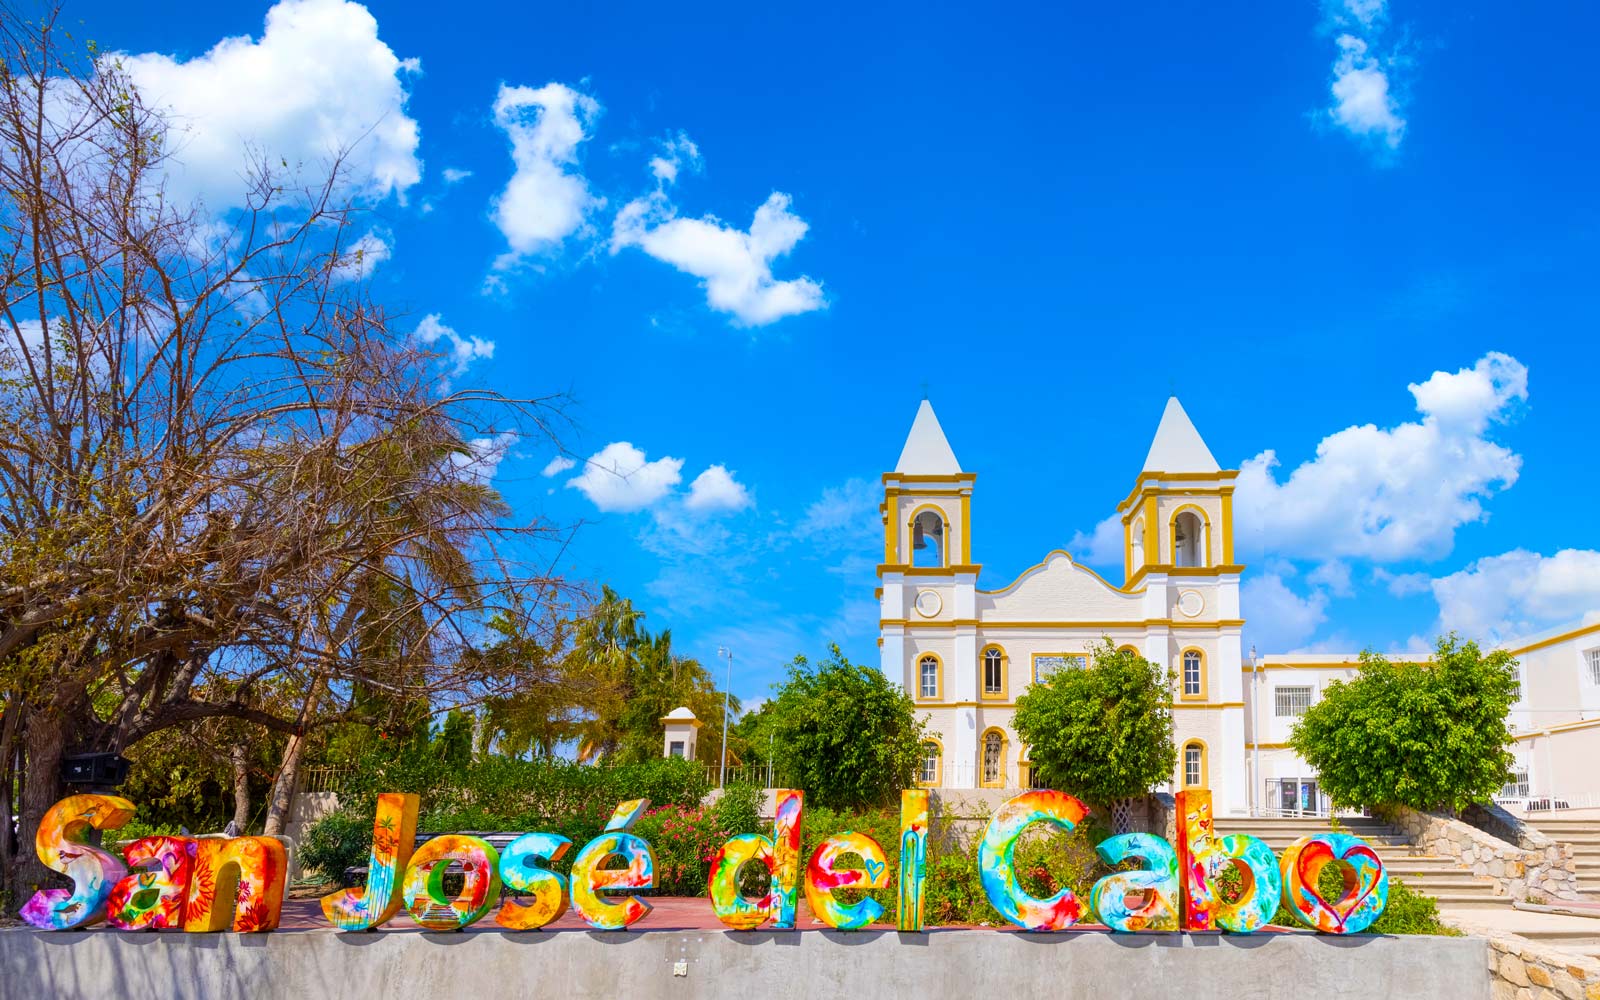 things to do in Cabo? San Jose Del Cabo